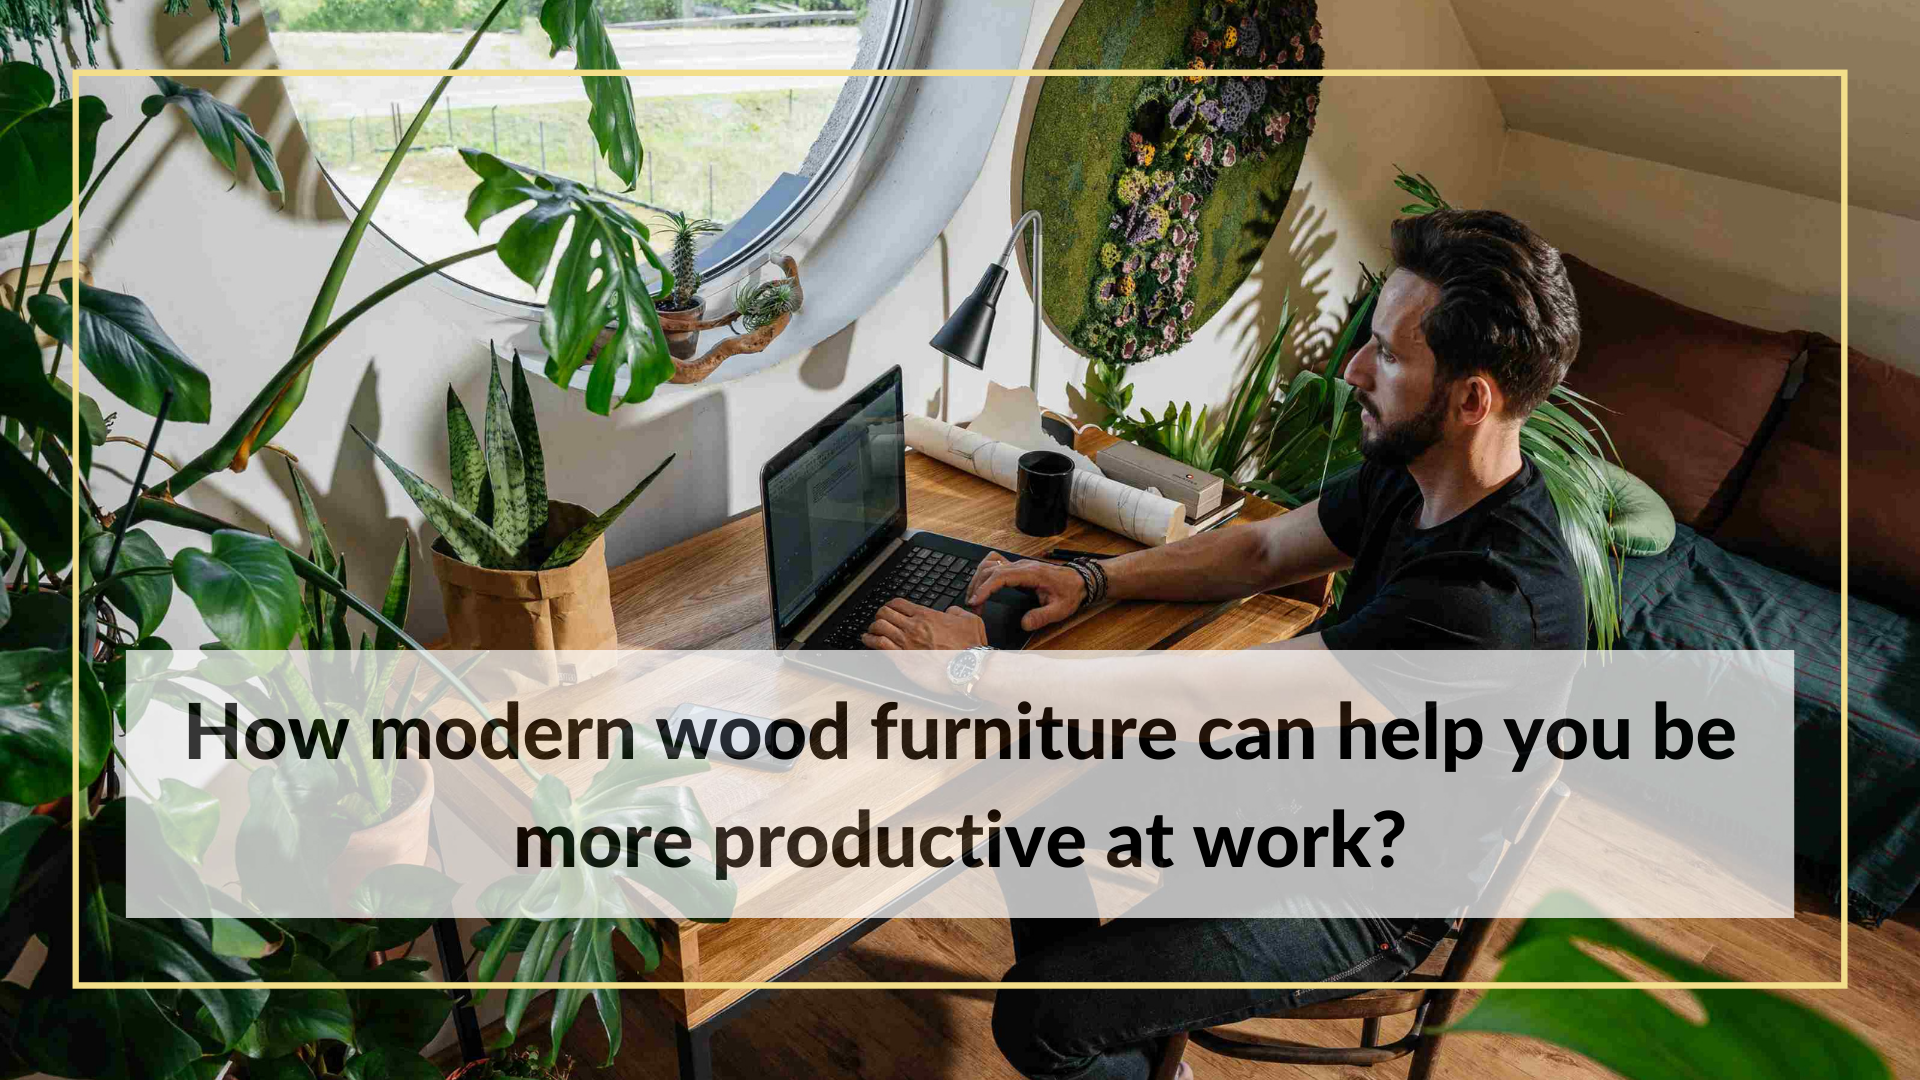 How modern wood furniture can help you be more productive at work